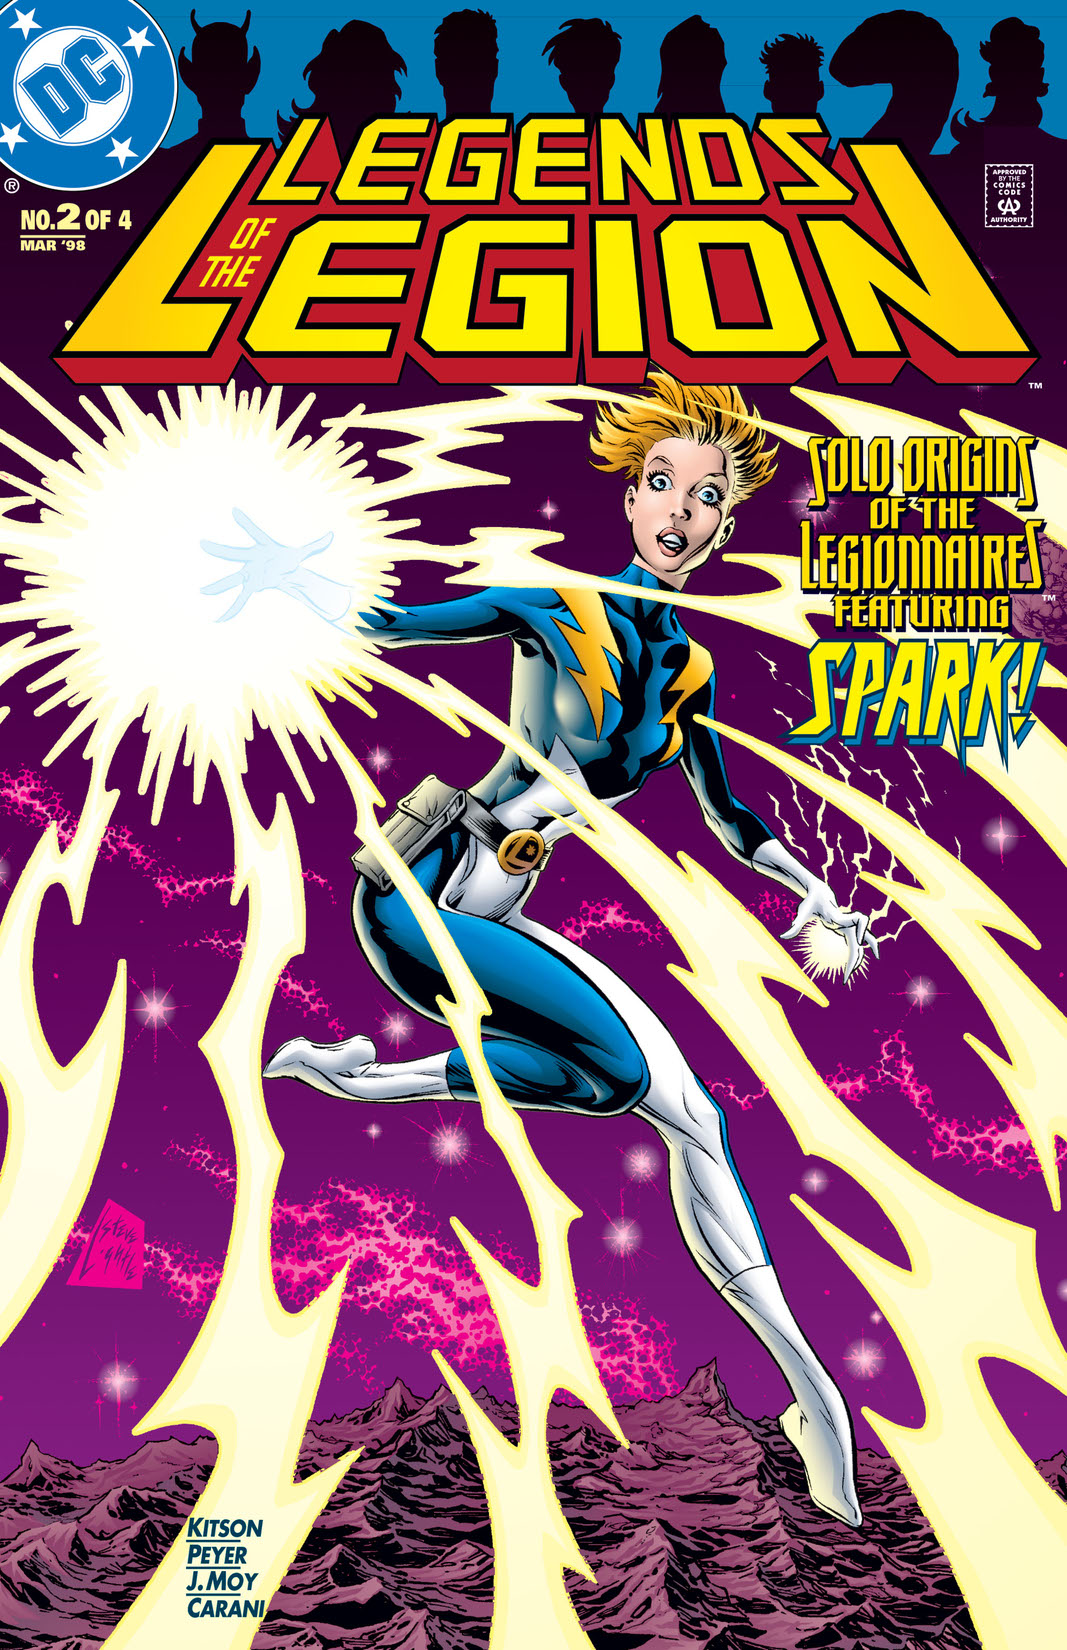 Legends of the Legion #2 preview images